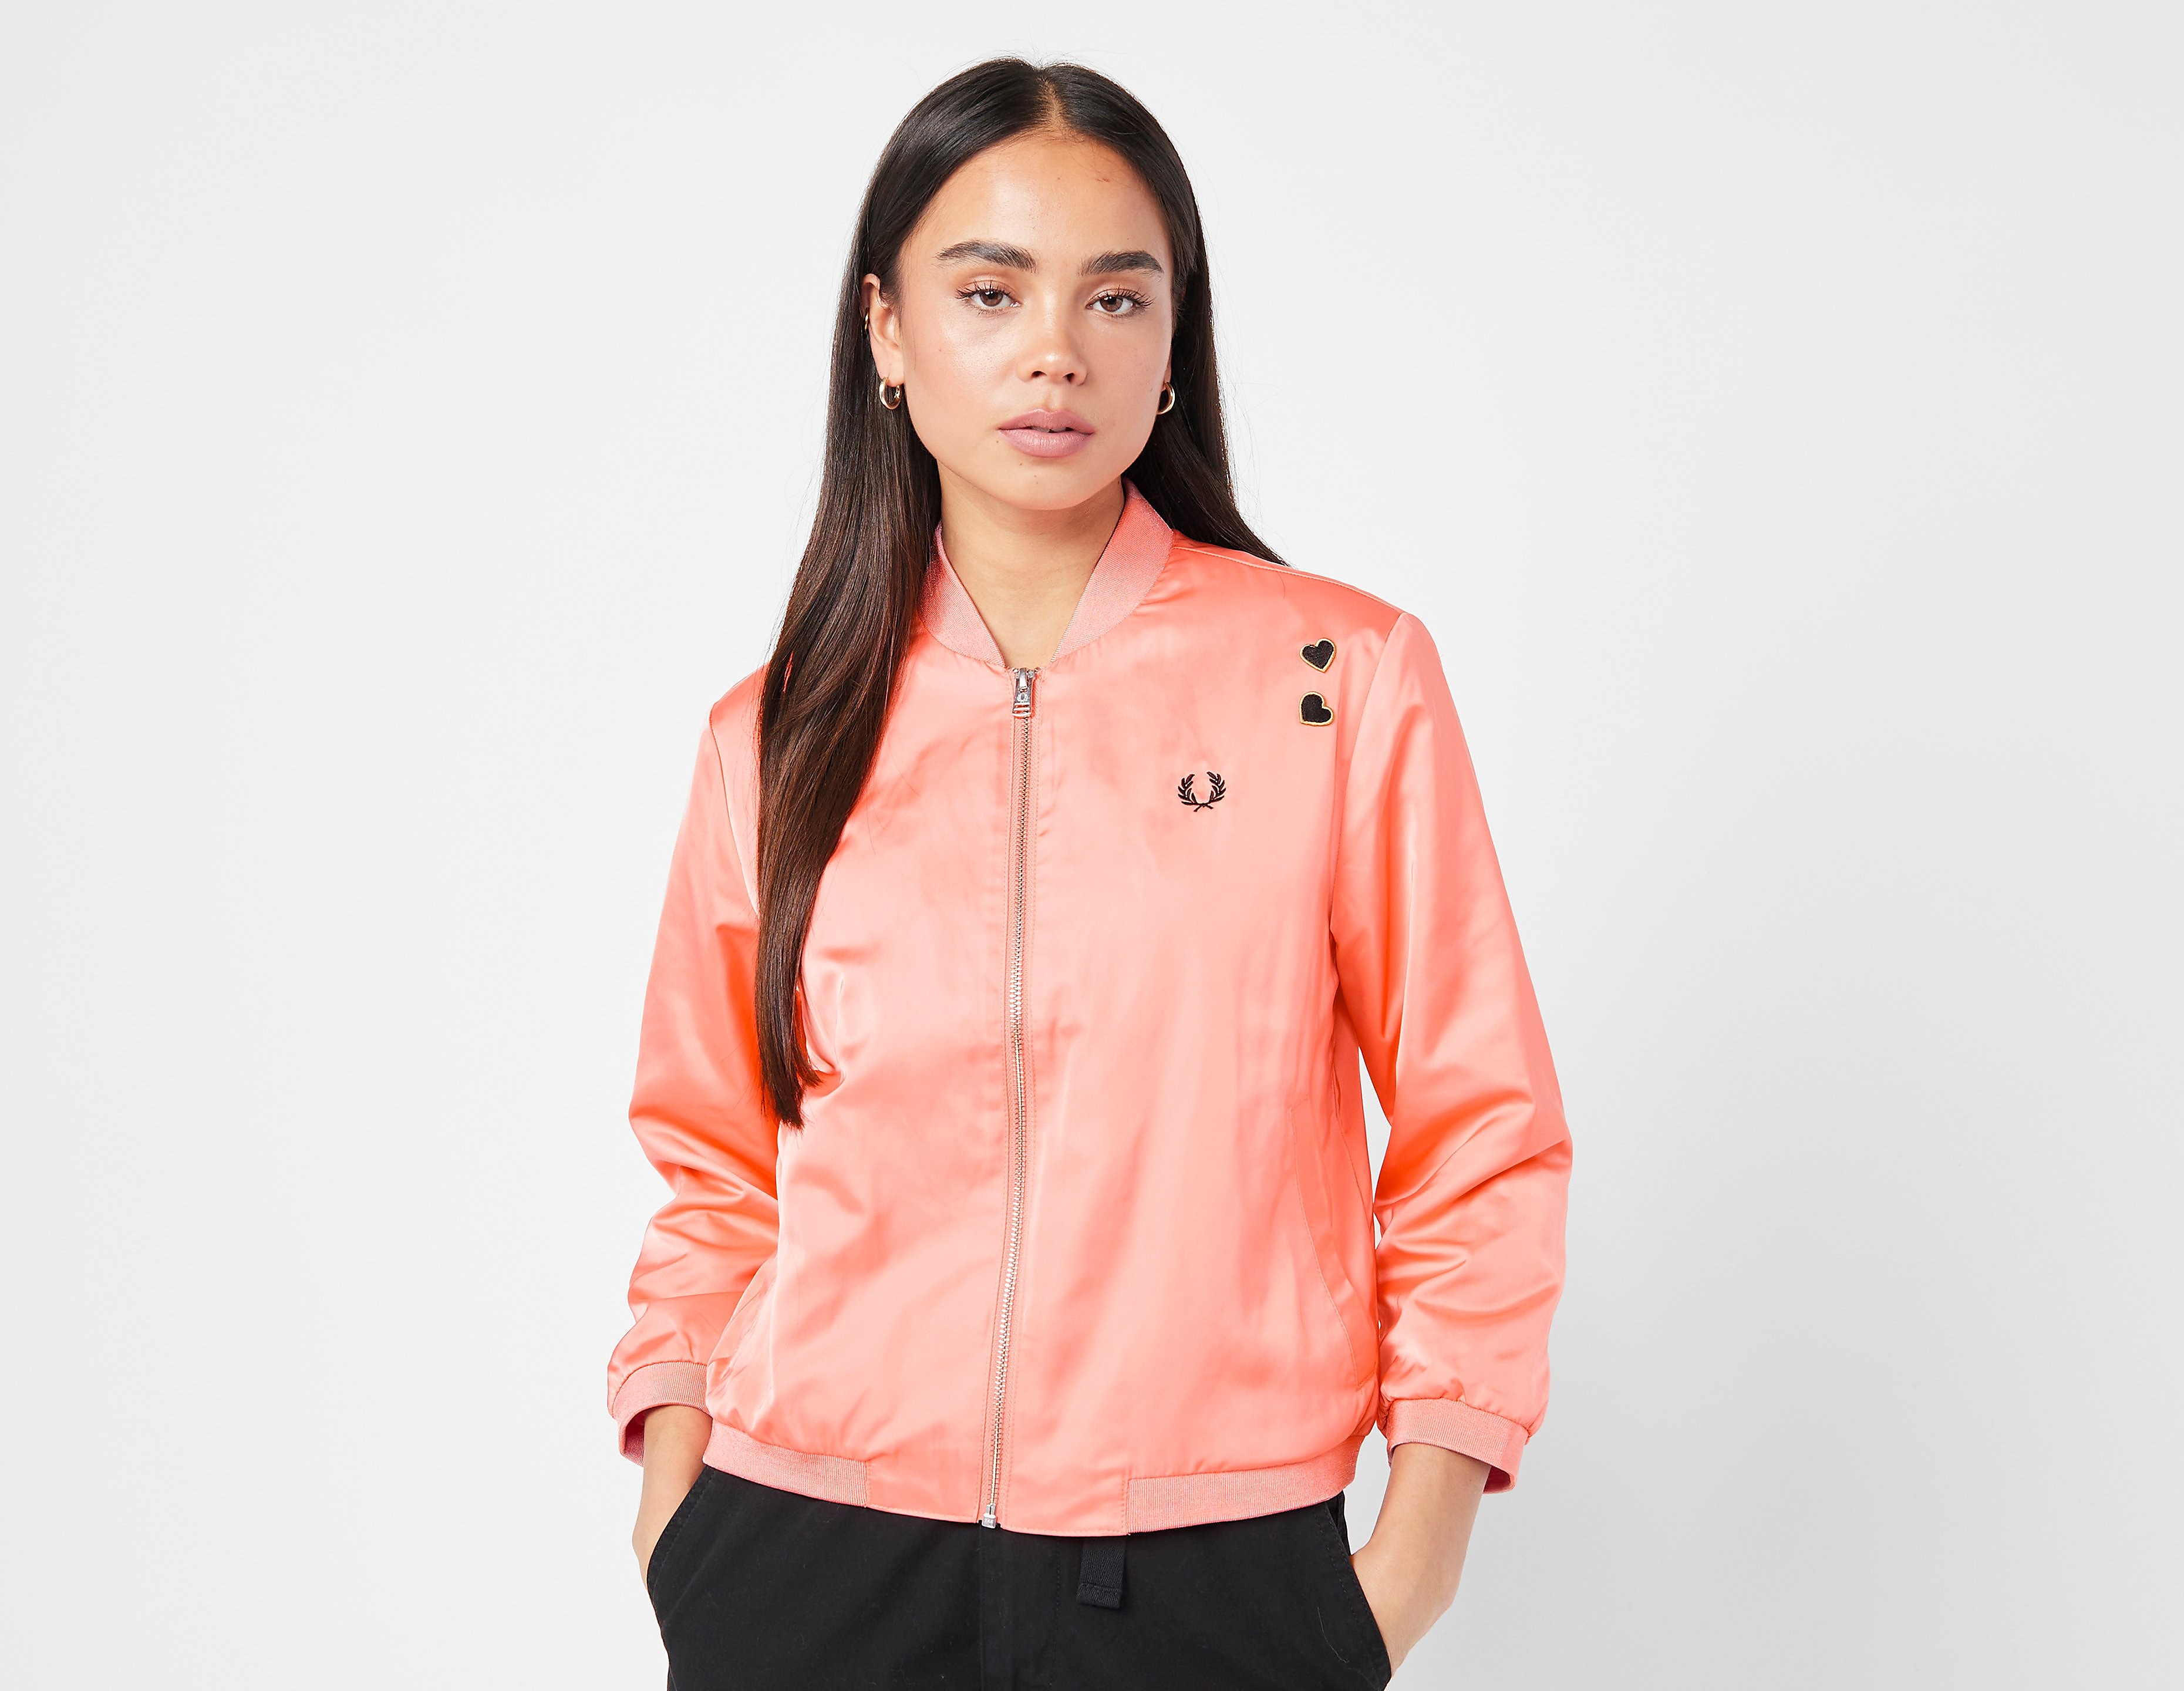 Fred Perry Amy Winehouse Bomber Jacket Women's